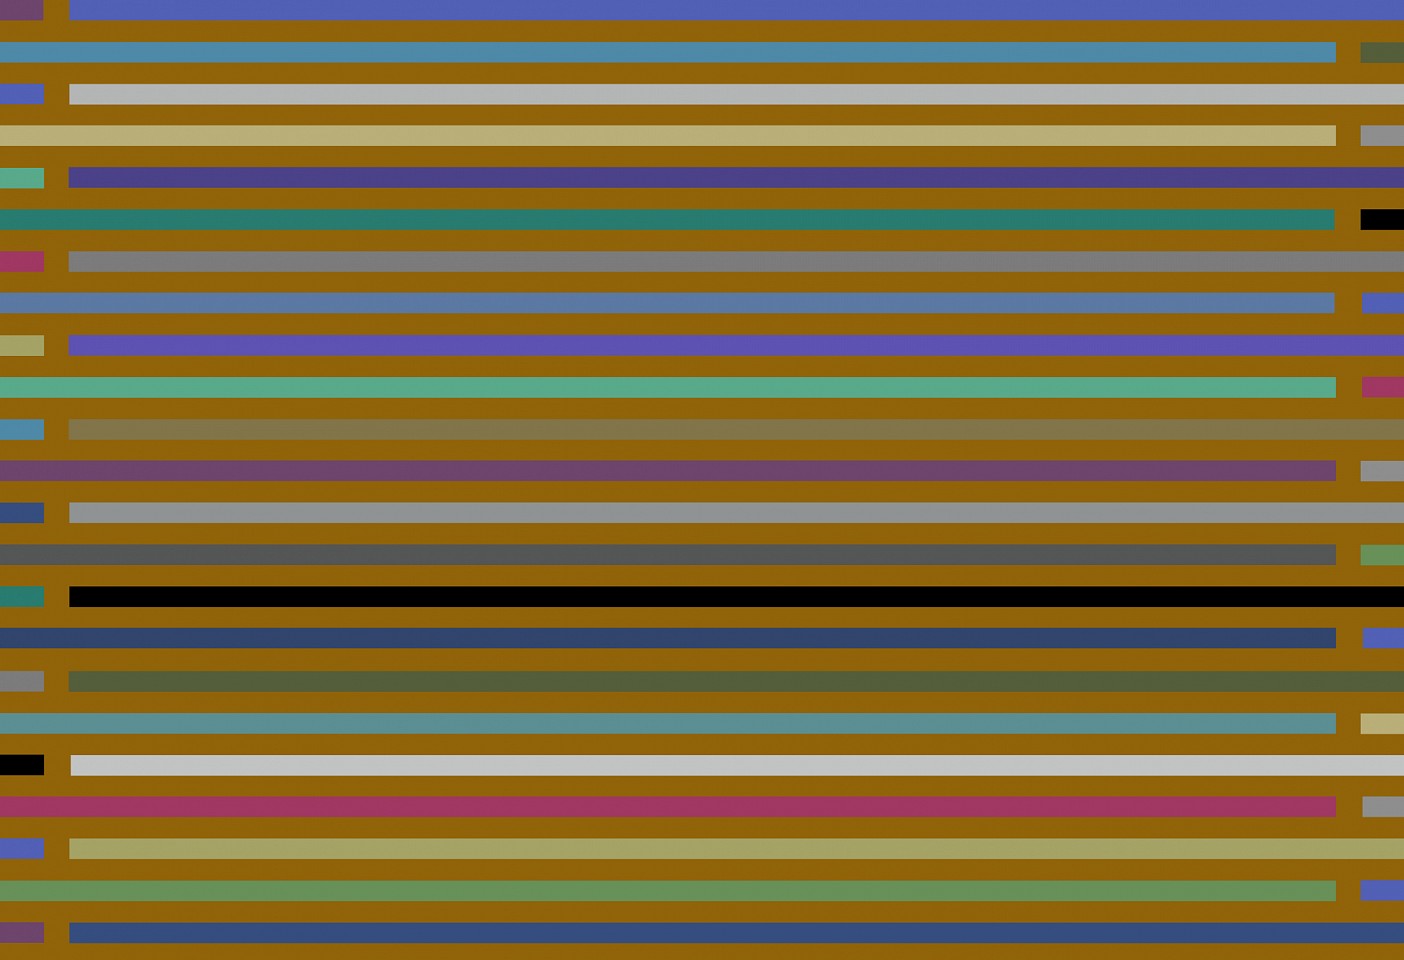 Dane Albert, Color Sticks #28 Dusk, 2023
Acrylic on canvas (Concept), 48 x 72 in. (121.9 x 182.9 cm)
Series of colored lines and shapes in multiple configurations
DA.2023.sticks-028-dusk